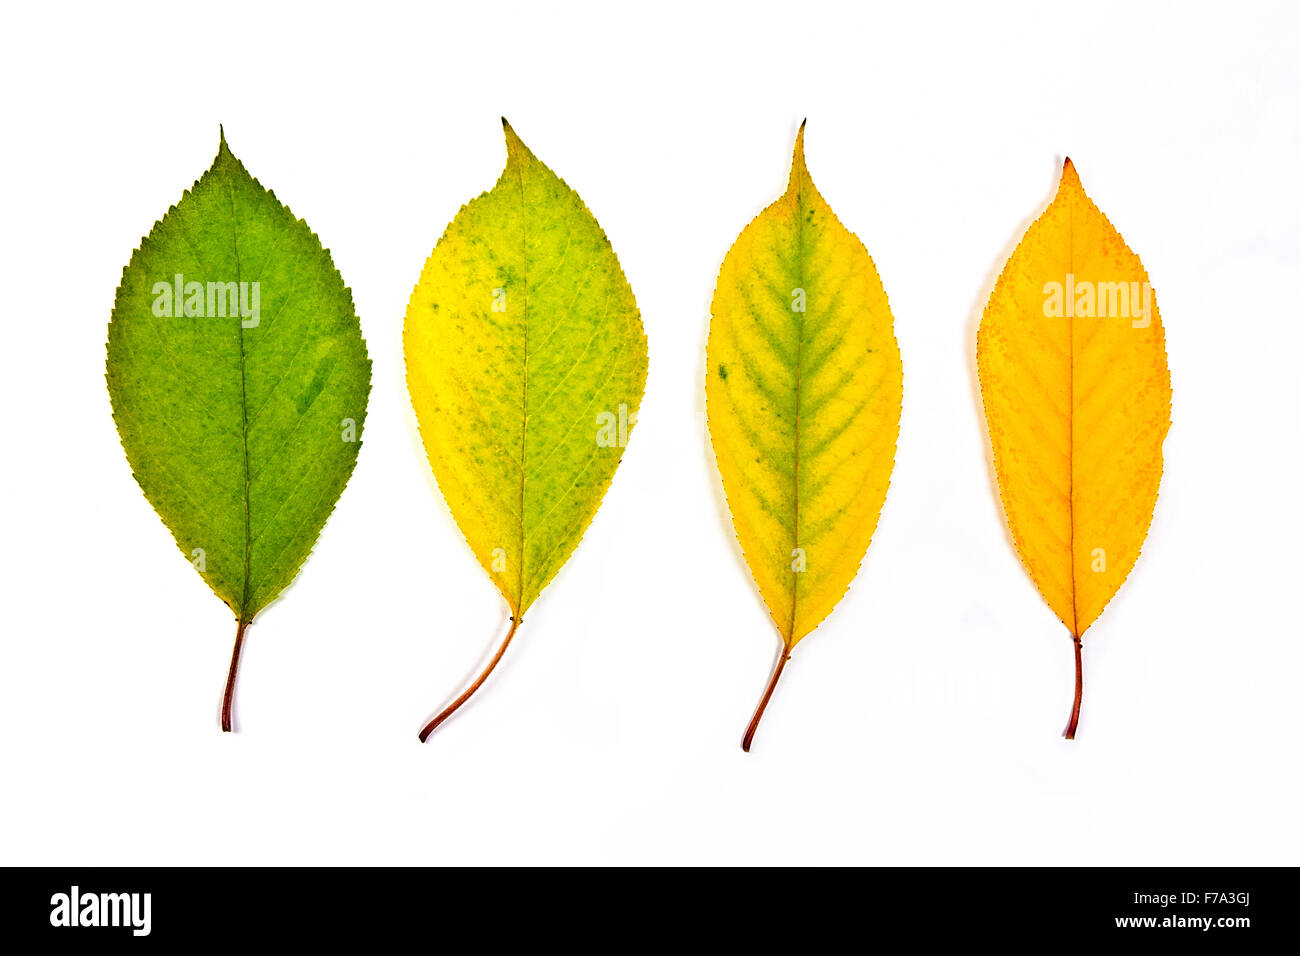 Autumn leaves of cherry tree isolated on white background. With clipping path. Autumn leaves of cherry tree colored by yellow, r Stock Photo